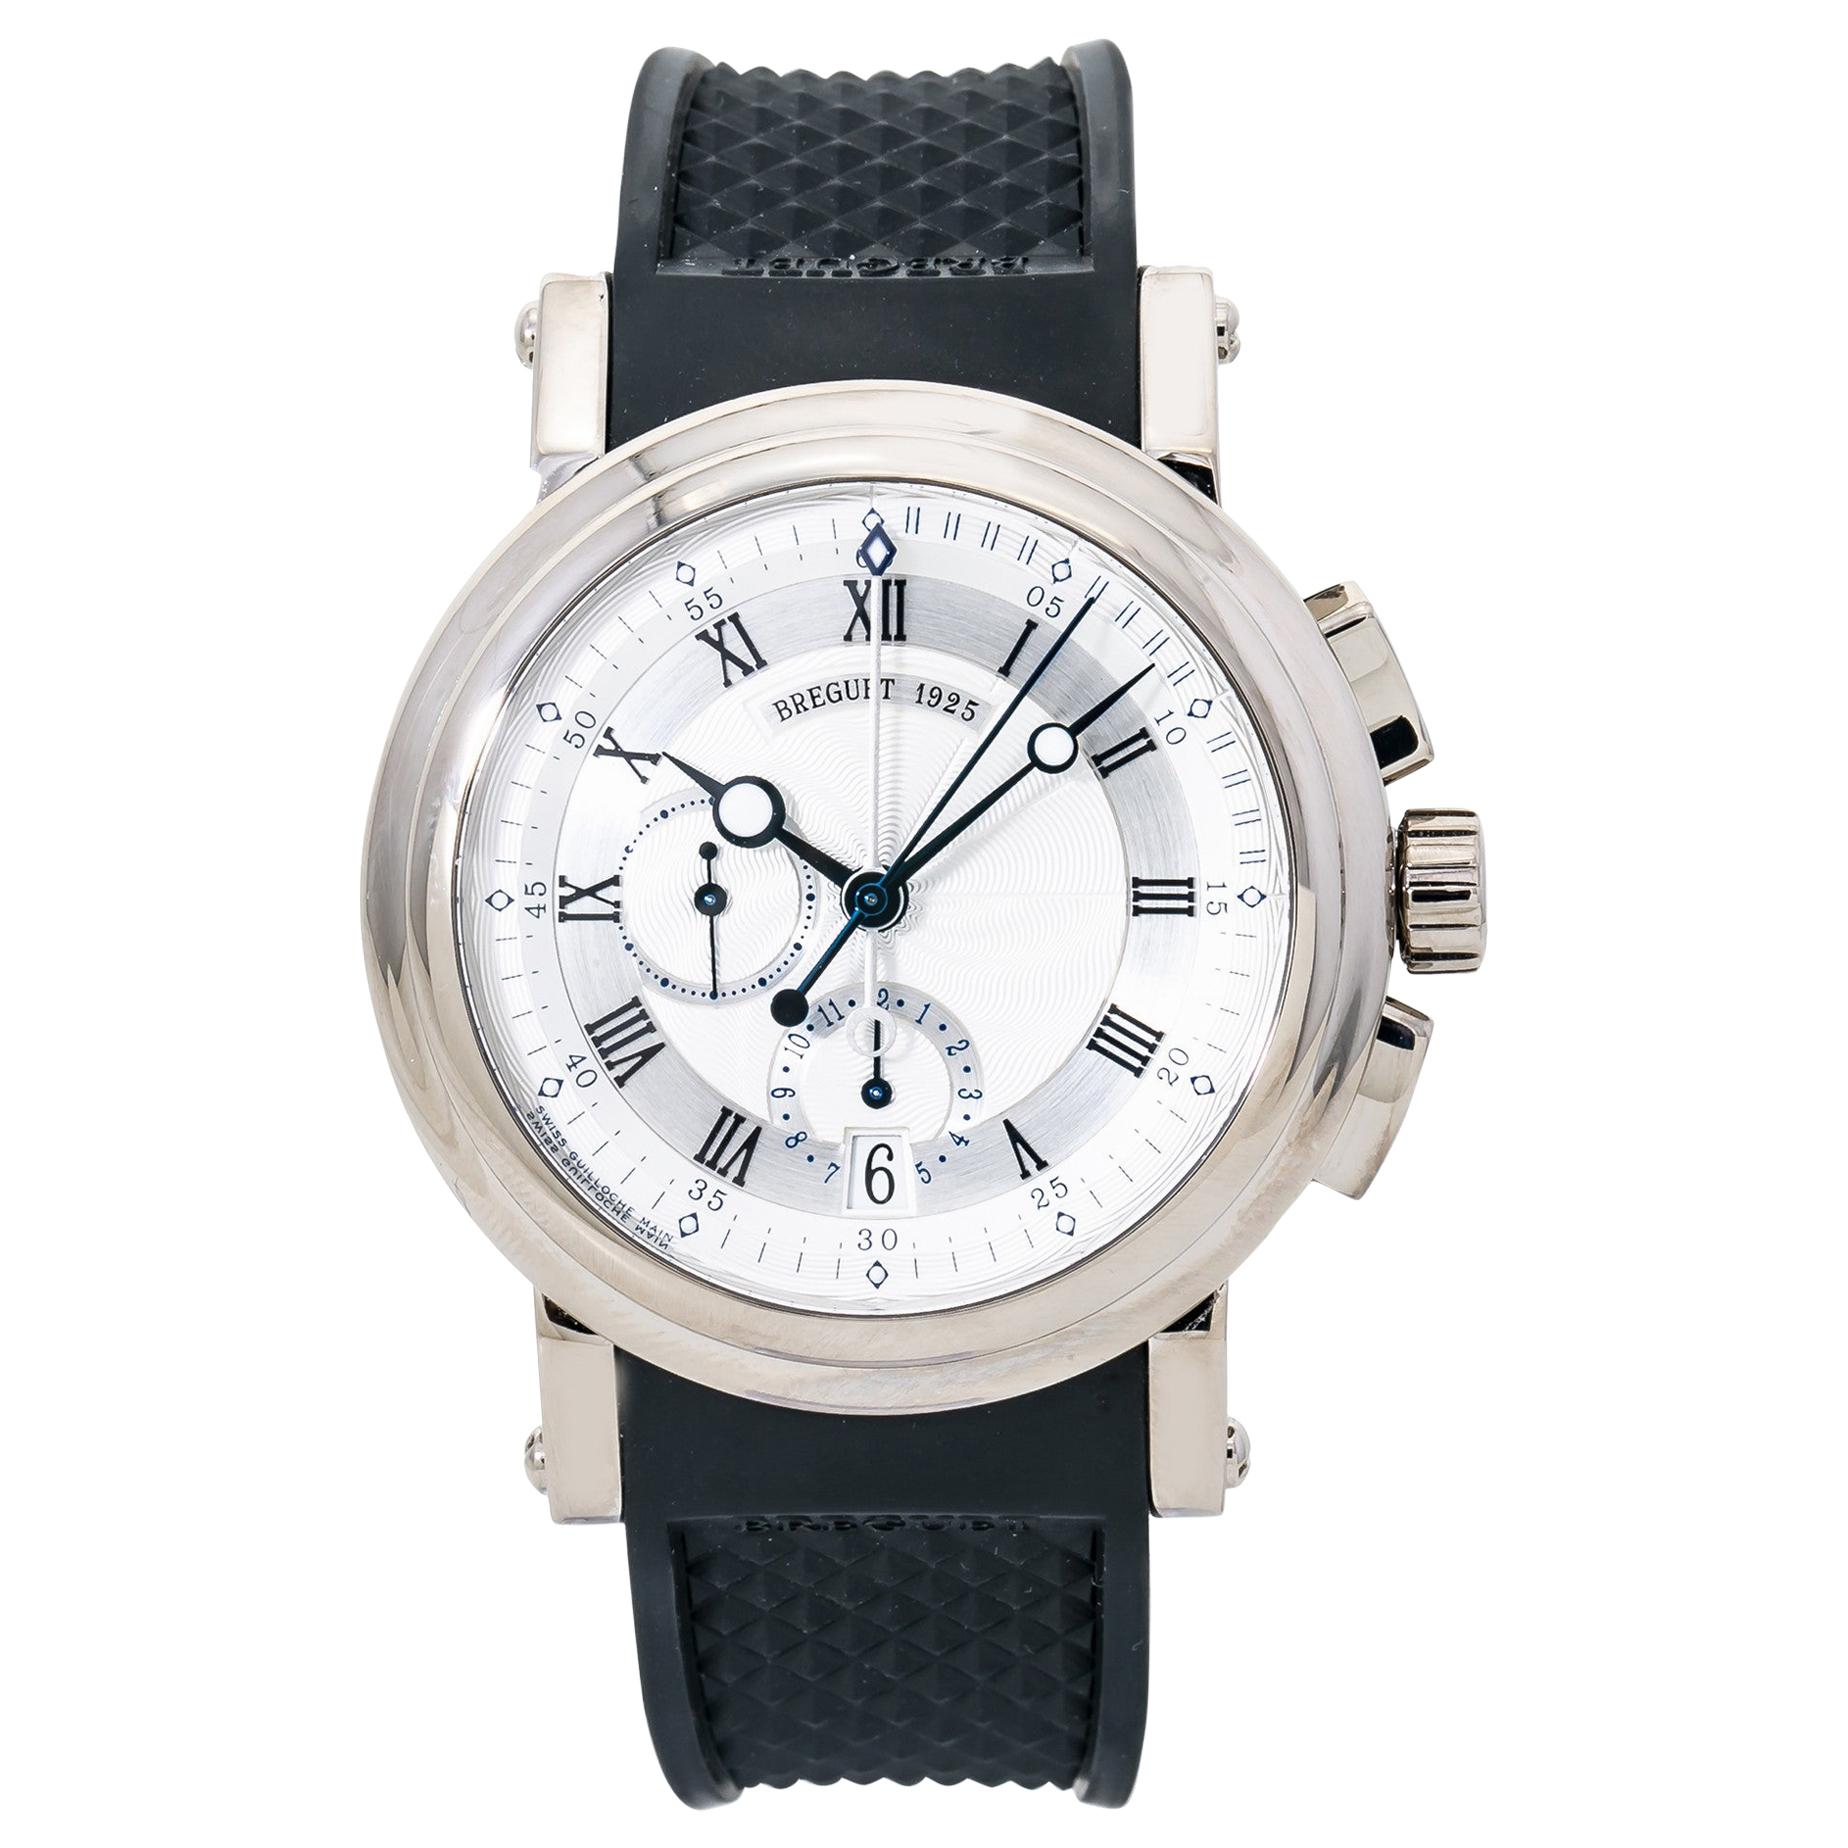 Breguet Marine 5827, Silver Dial, Certified and Warranty